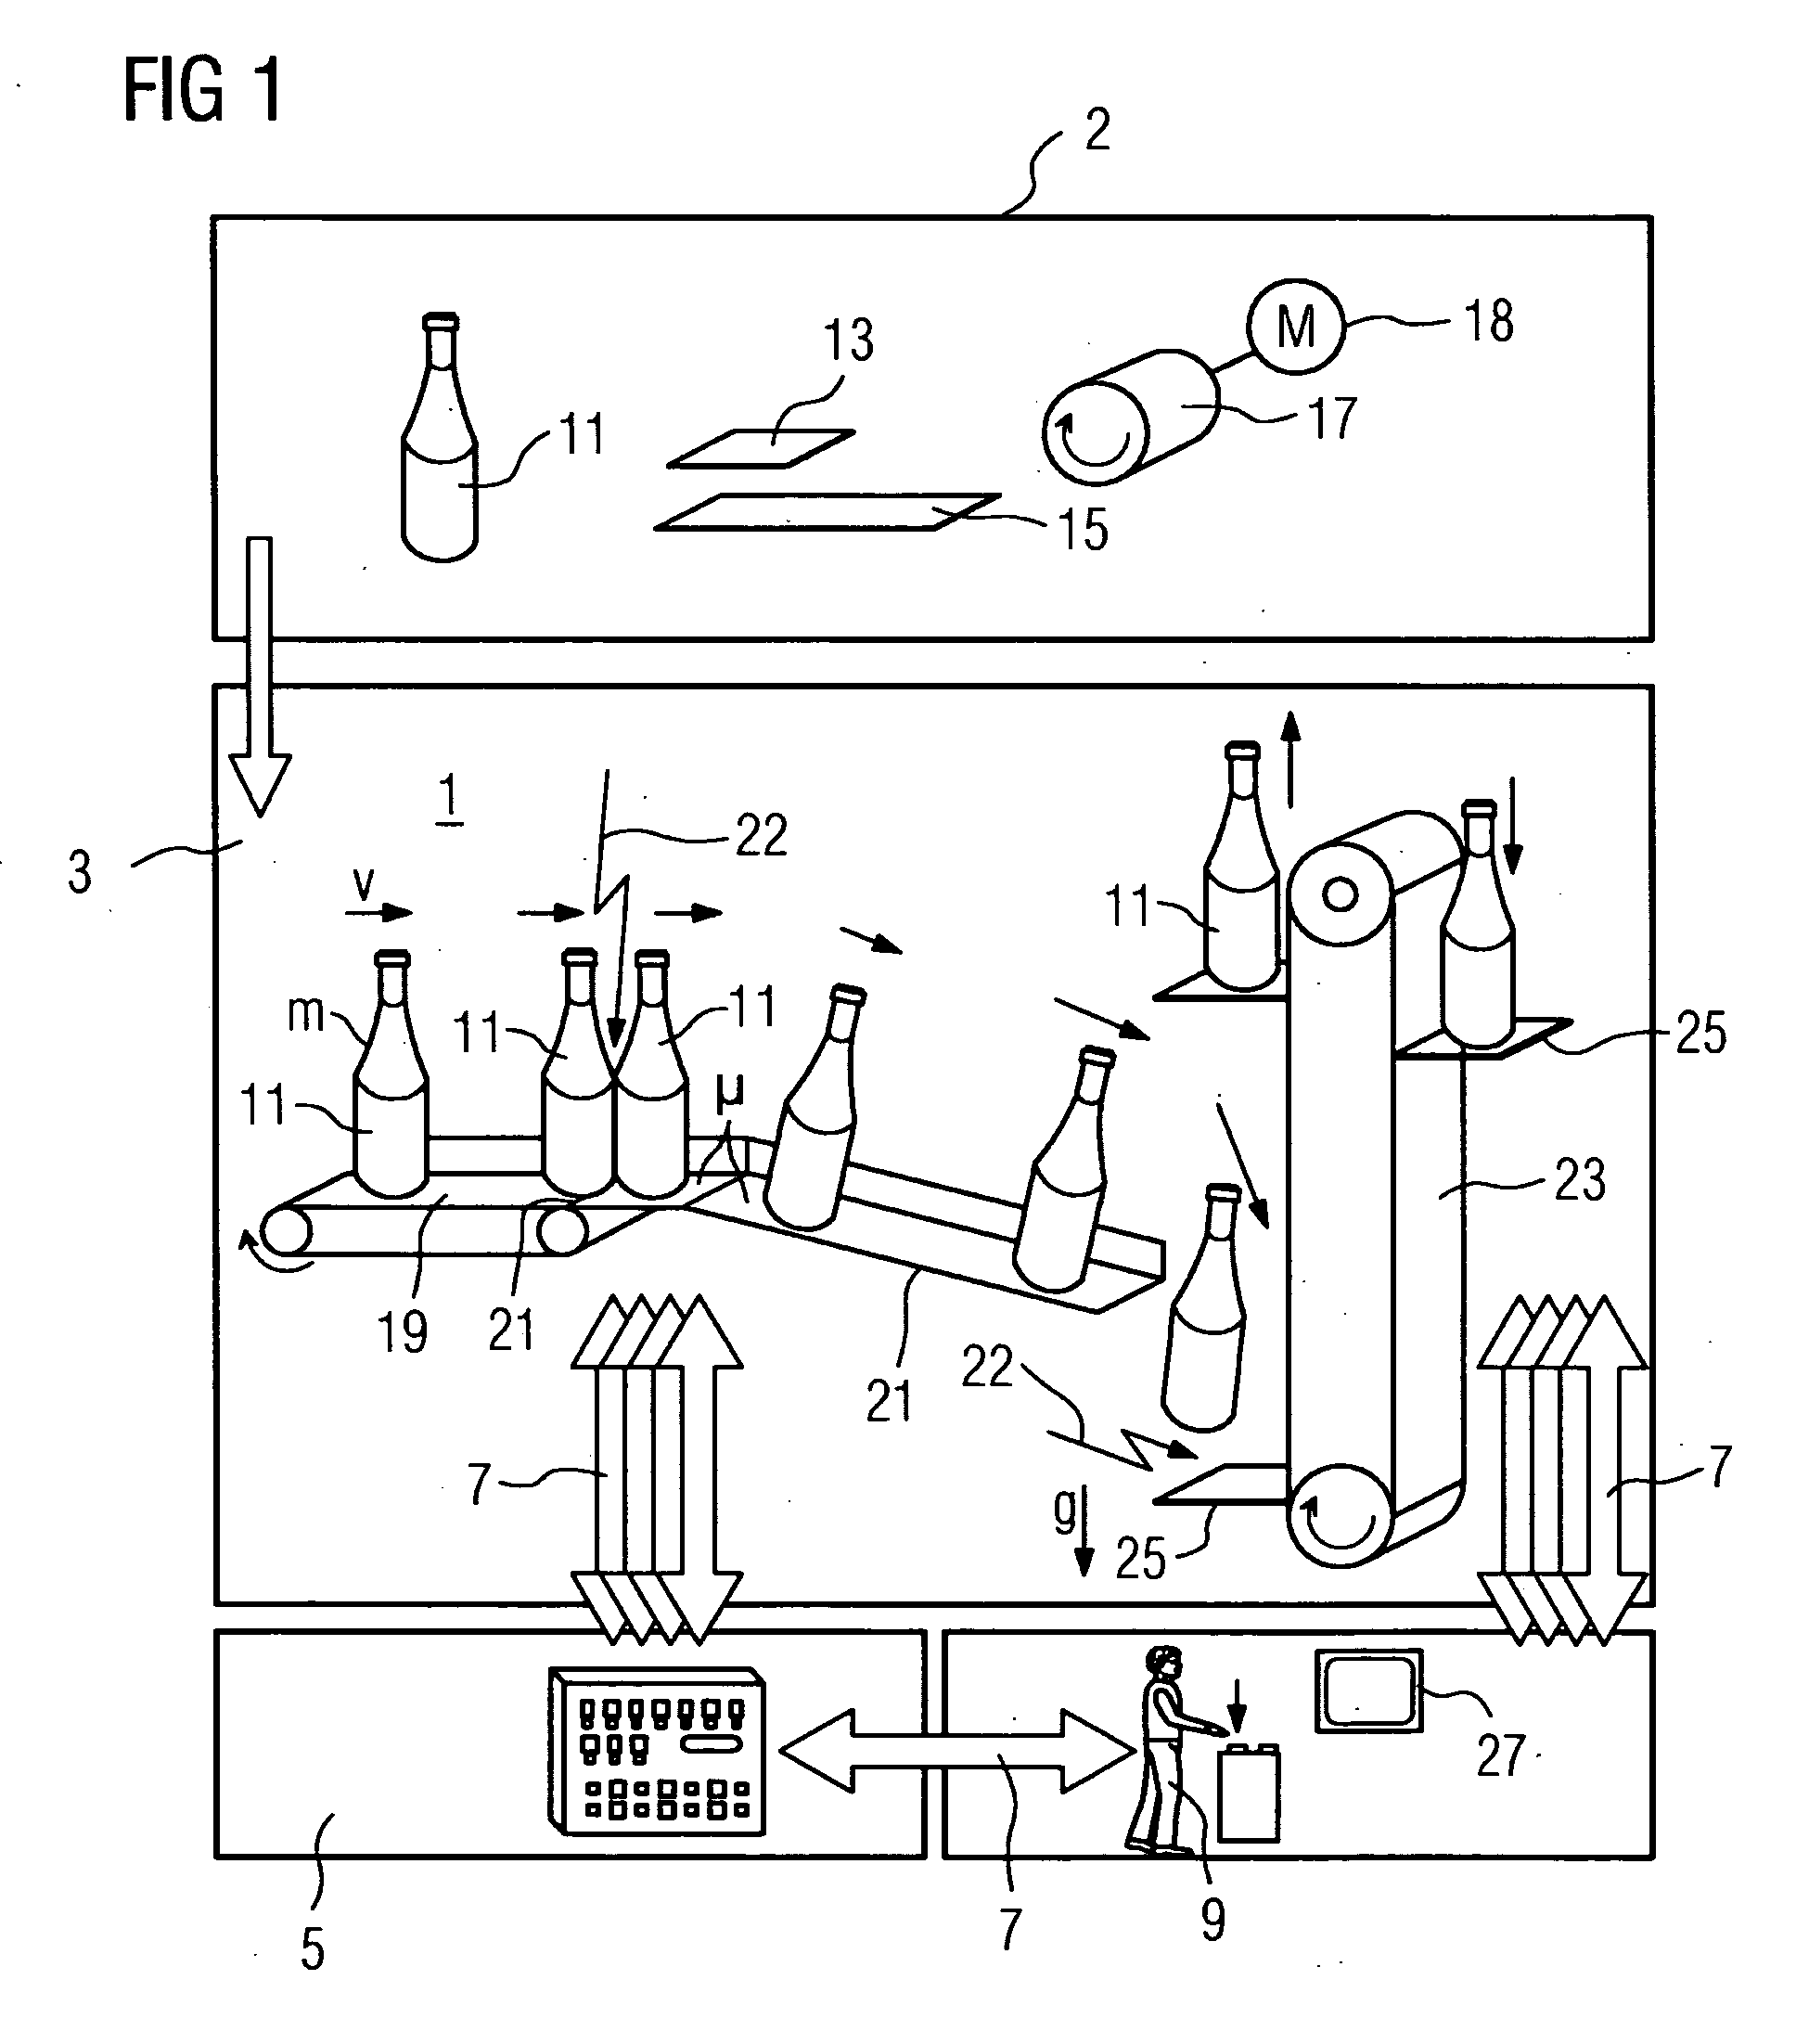 Method and/or device for controlling and/or monitoring the movement of industrial machines